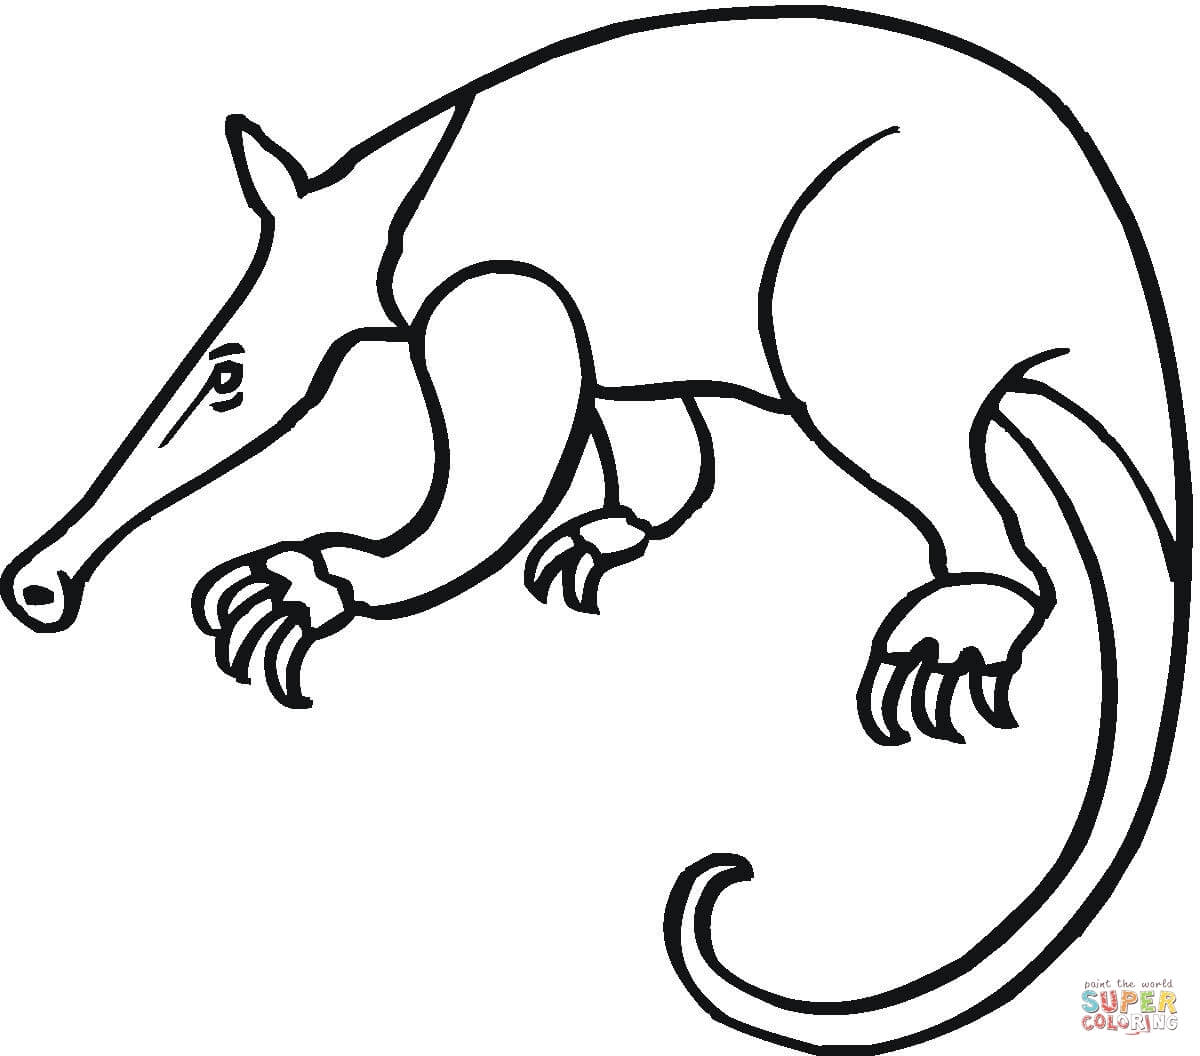 Anteater coloring pages | Free Coloring Pages